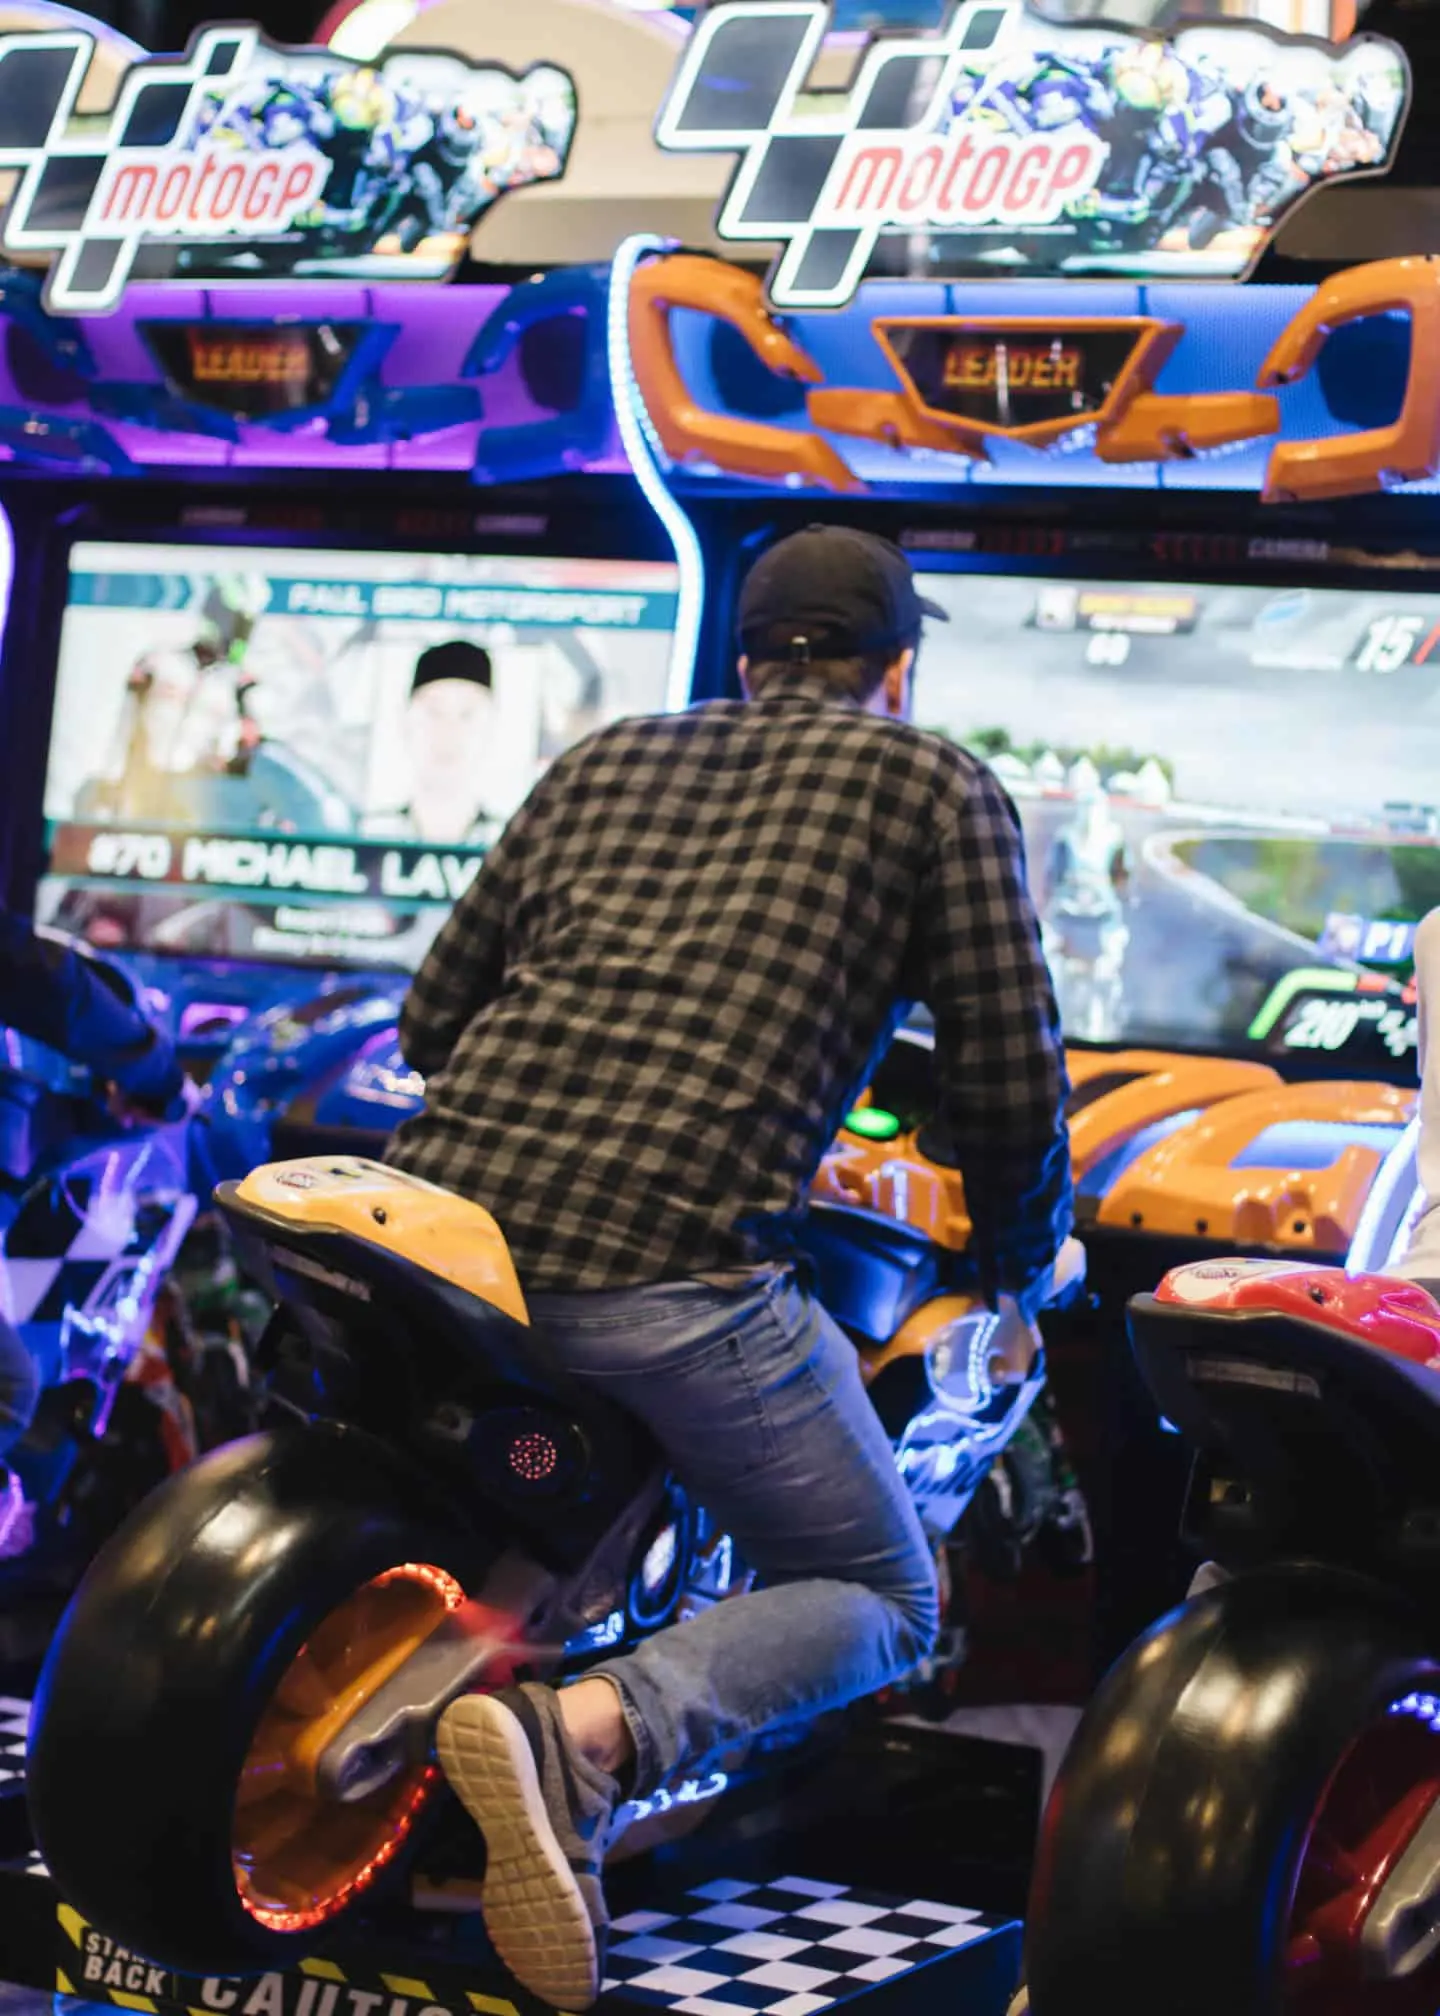 Motorcycle racing game at The Rec Room Toronto